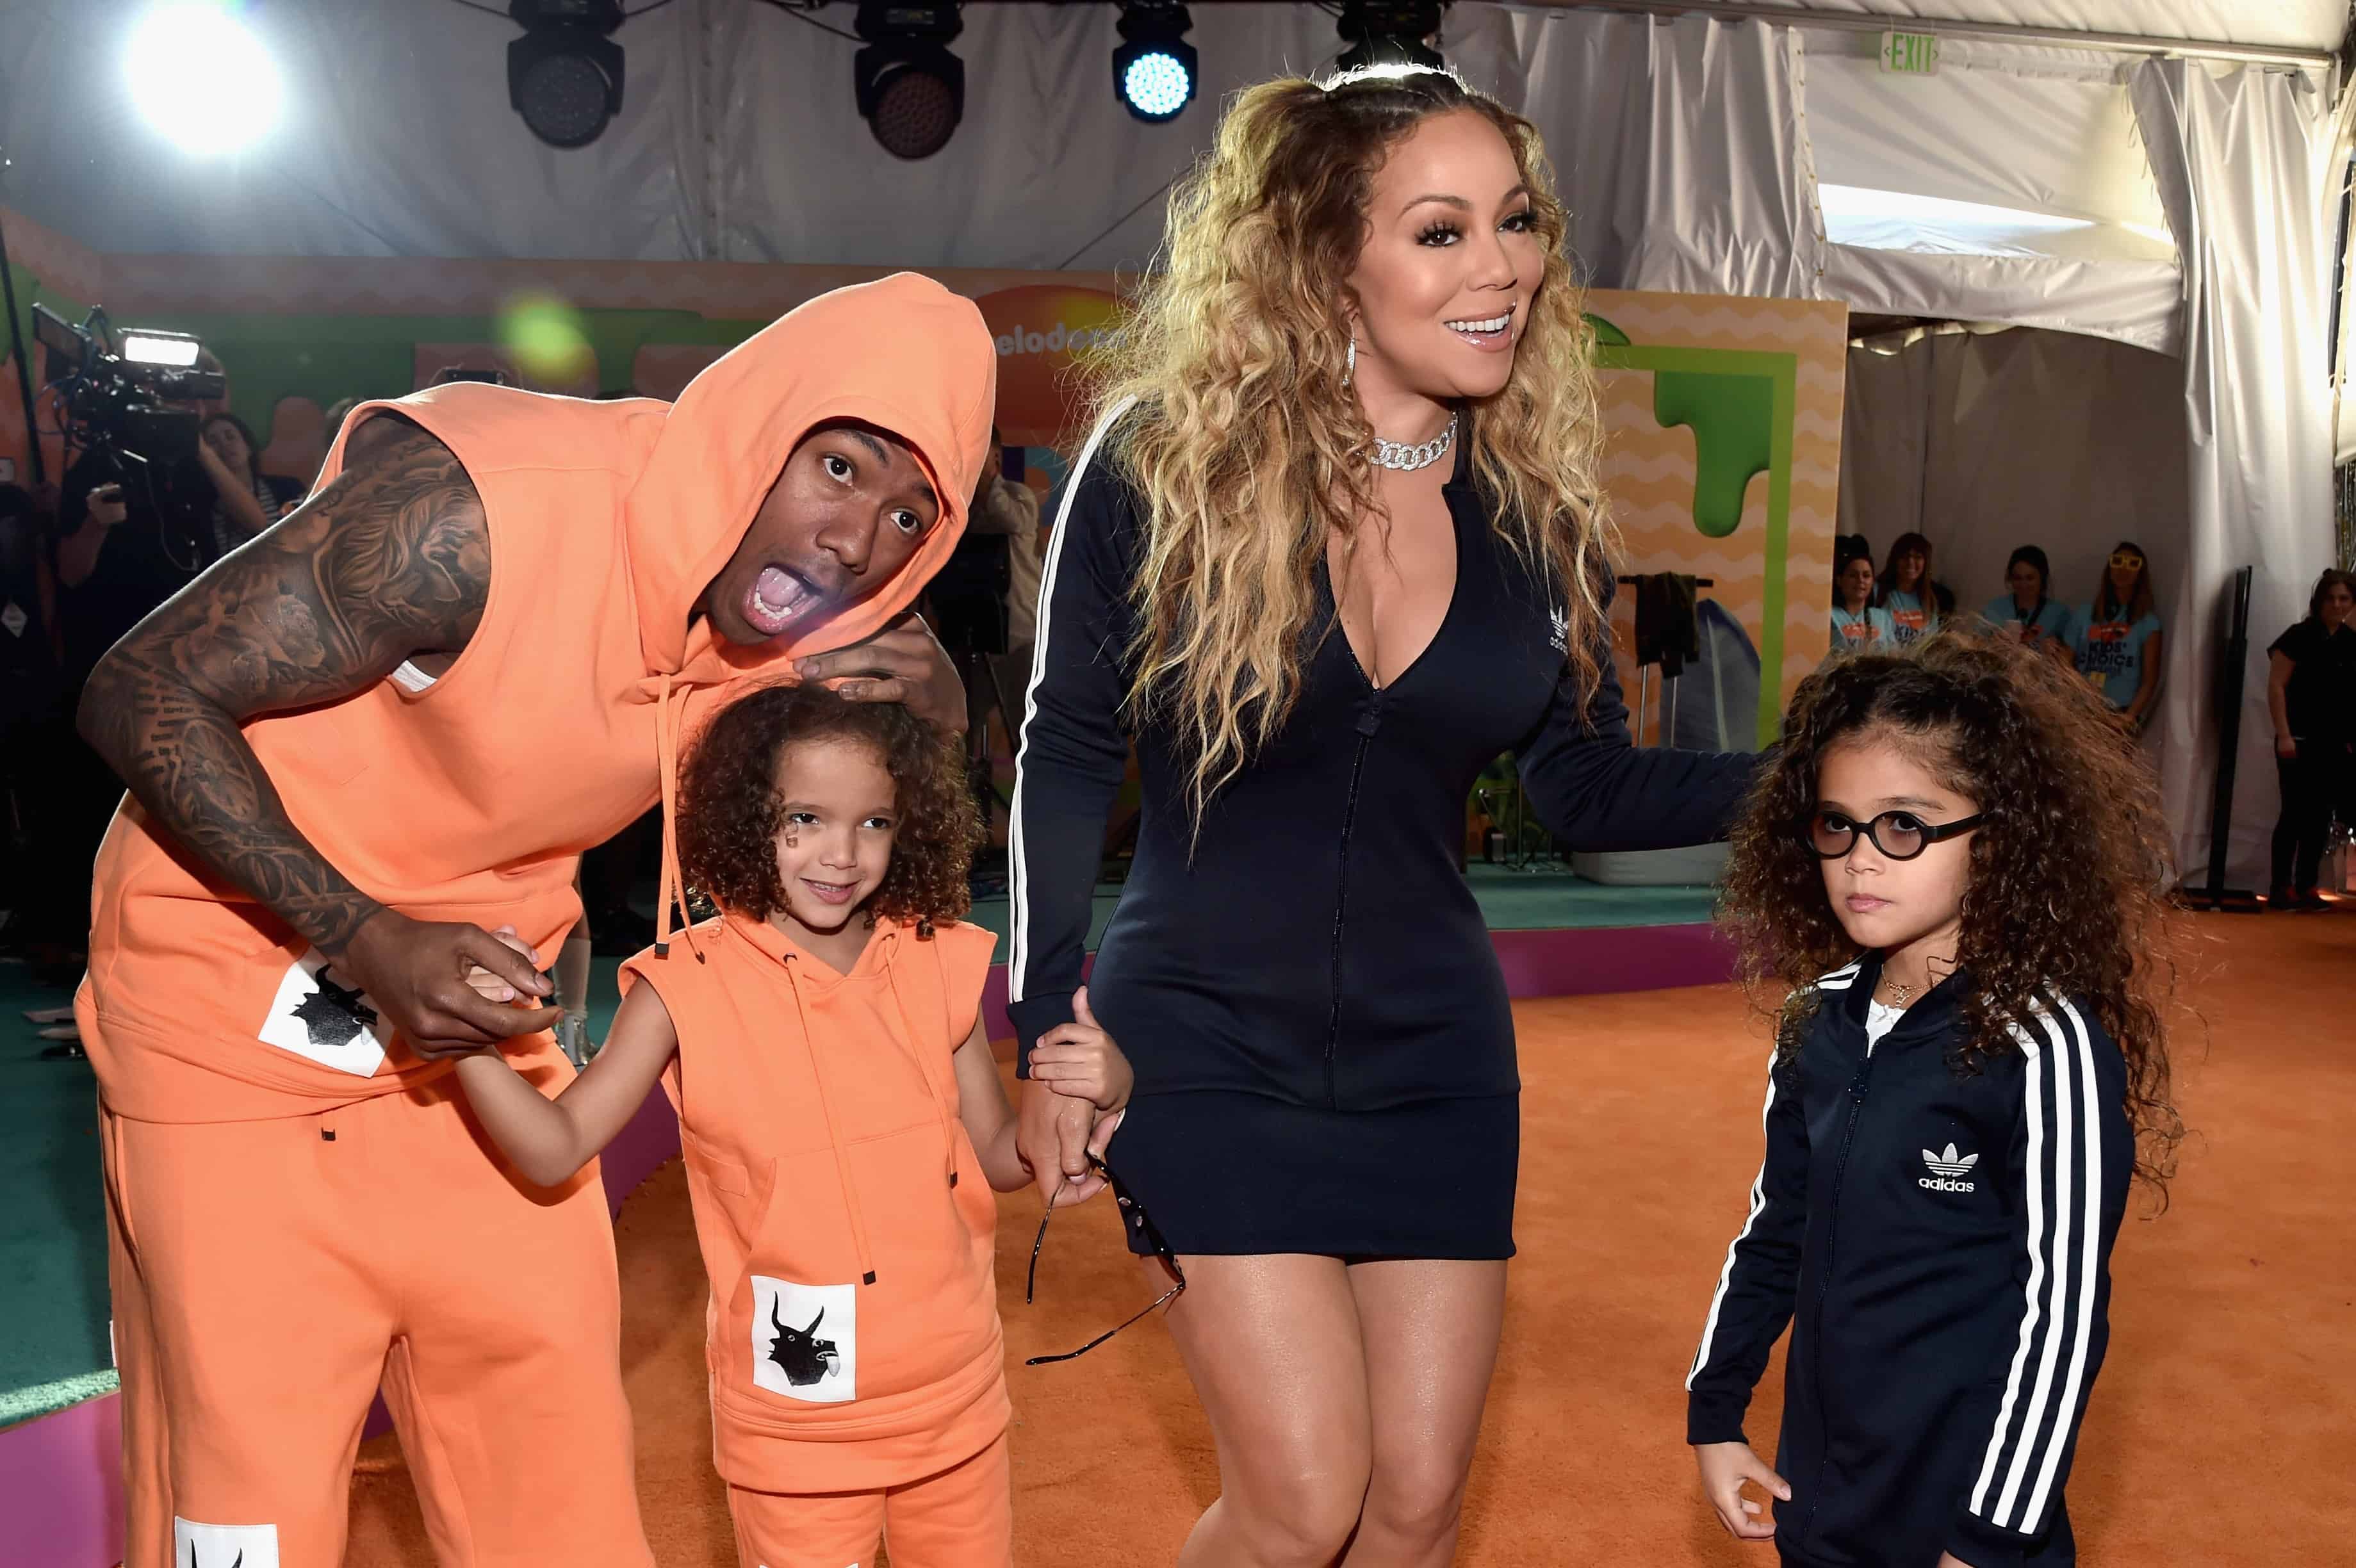 'She was my rock:' Nick Cannon Praises Mariah Carey For Support During Lupus Diagnosis